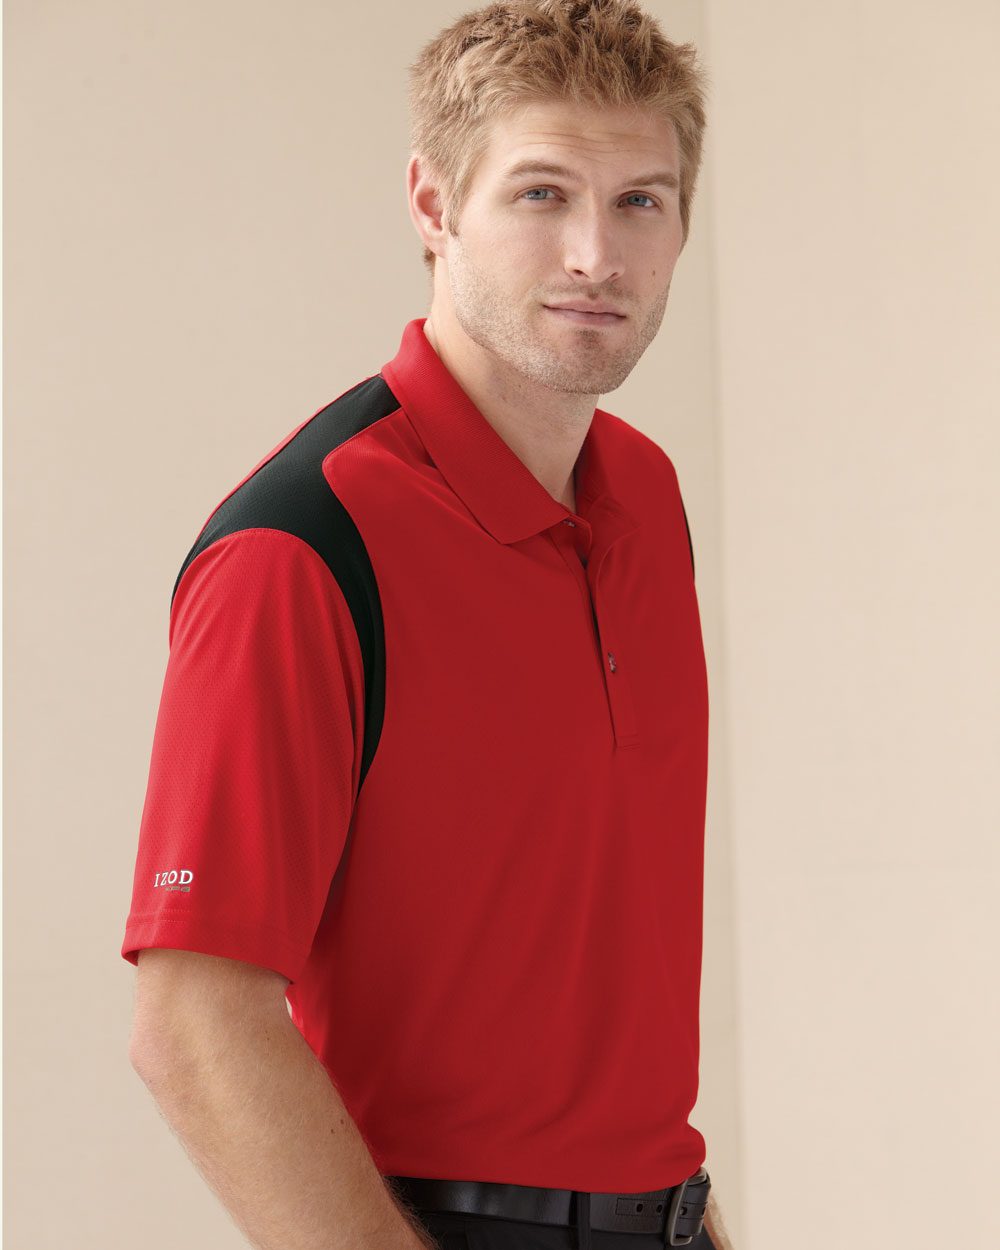 IZOD 13Z0095 Performance Sport Shirt with Contrast Color Inserts